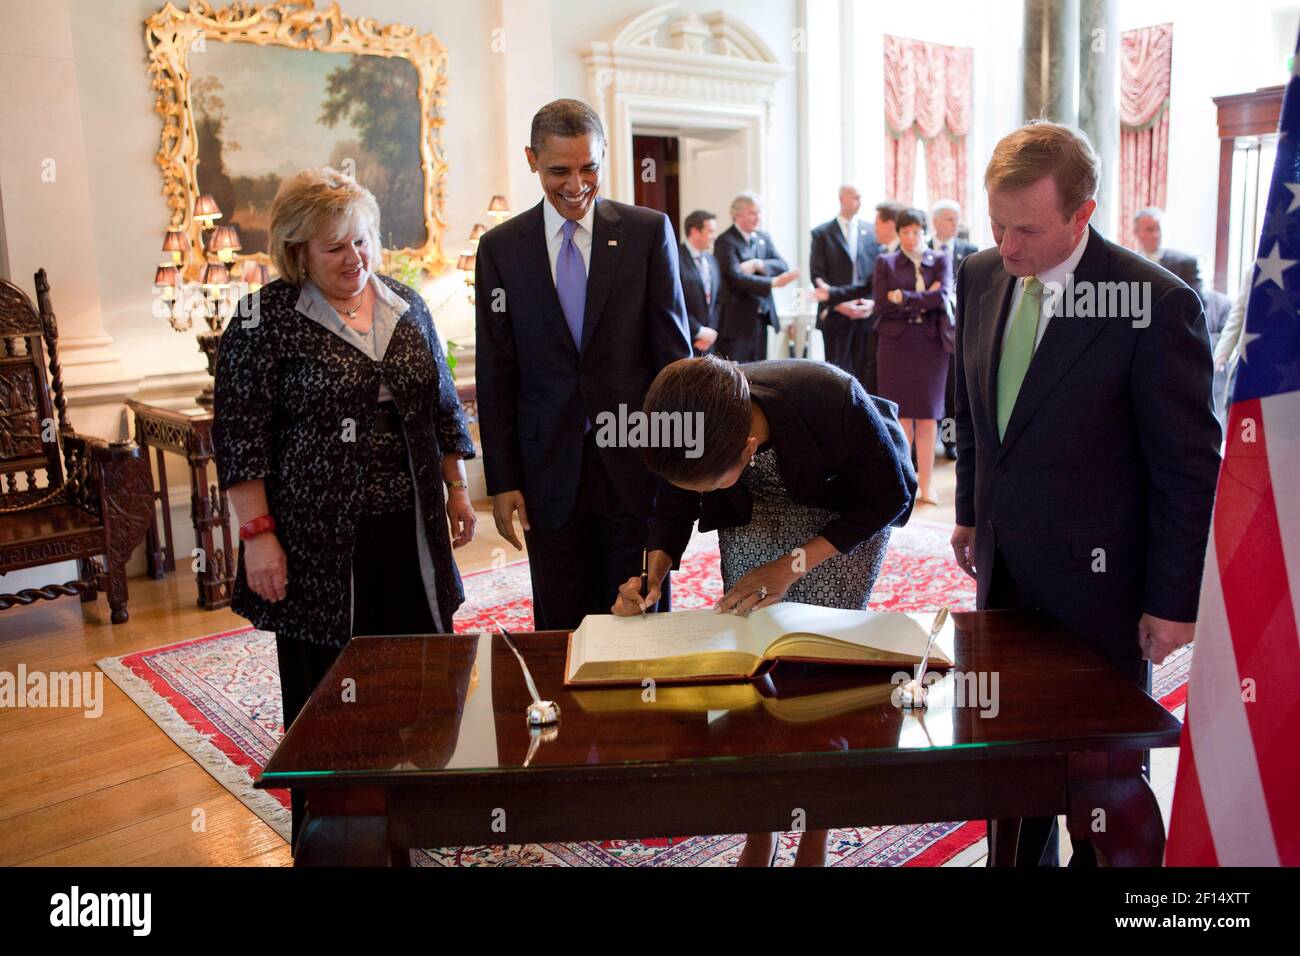 President Barack Obama and First Lady Michelle Obama sign the guestbook during their visit to Farmleigh in Dublin, Ireland, May 23, 2011 Stock Photo